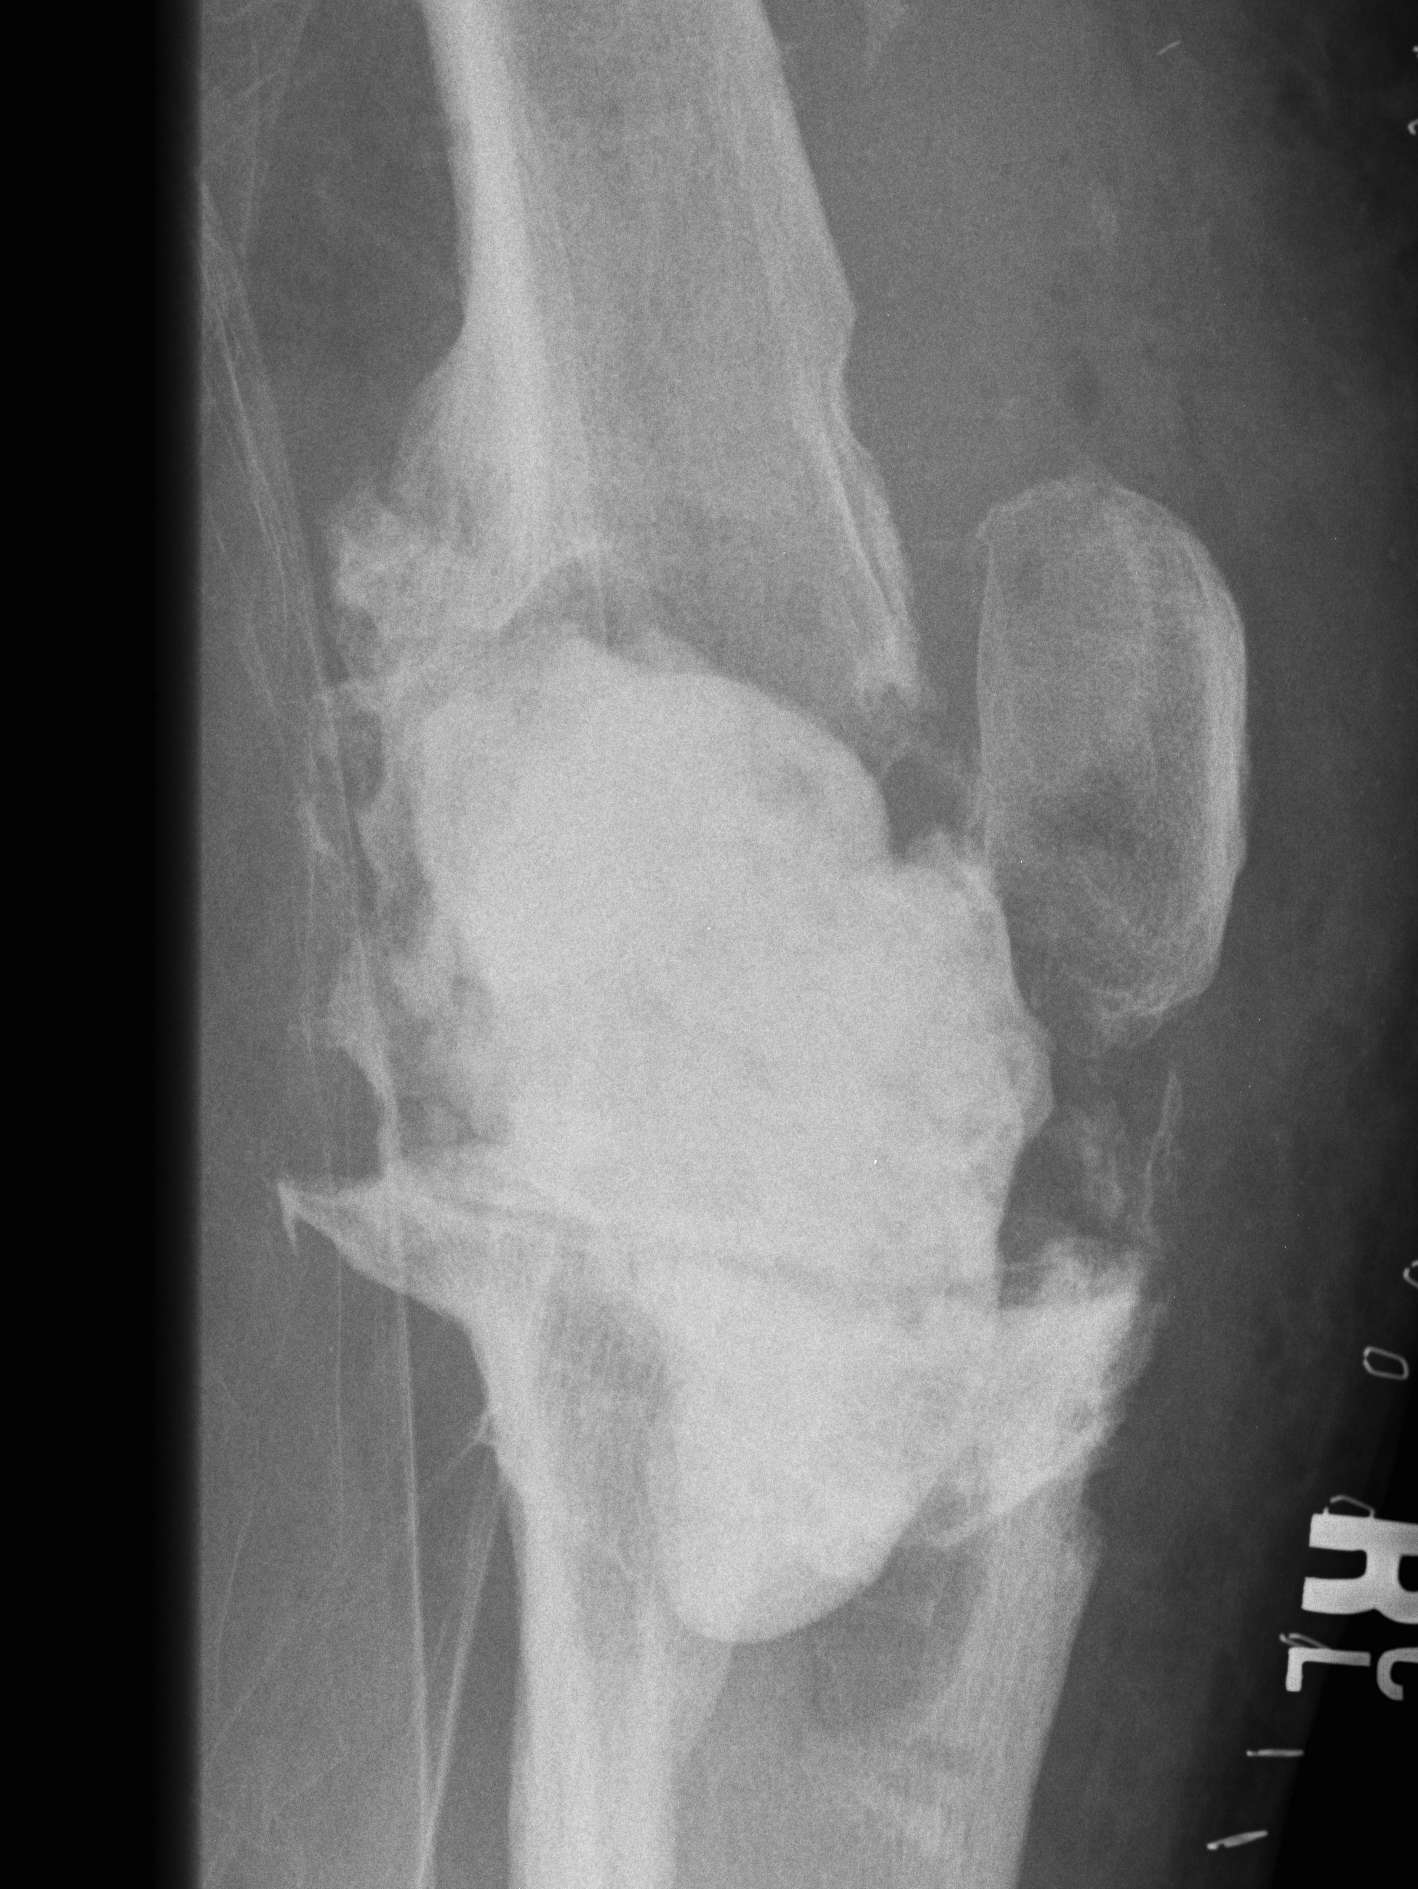 Infected TKR Cement Ball Bone Loss Lateral